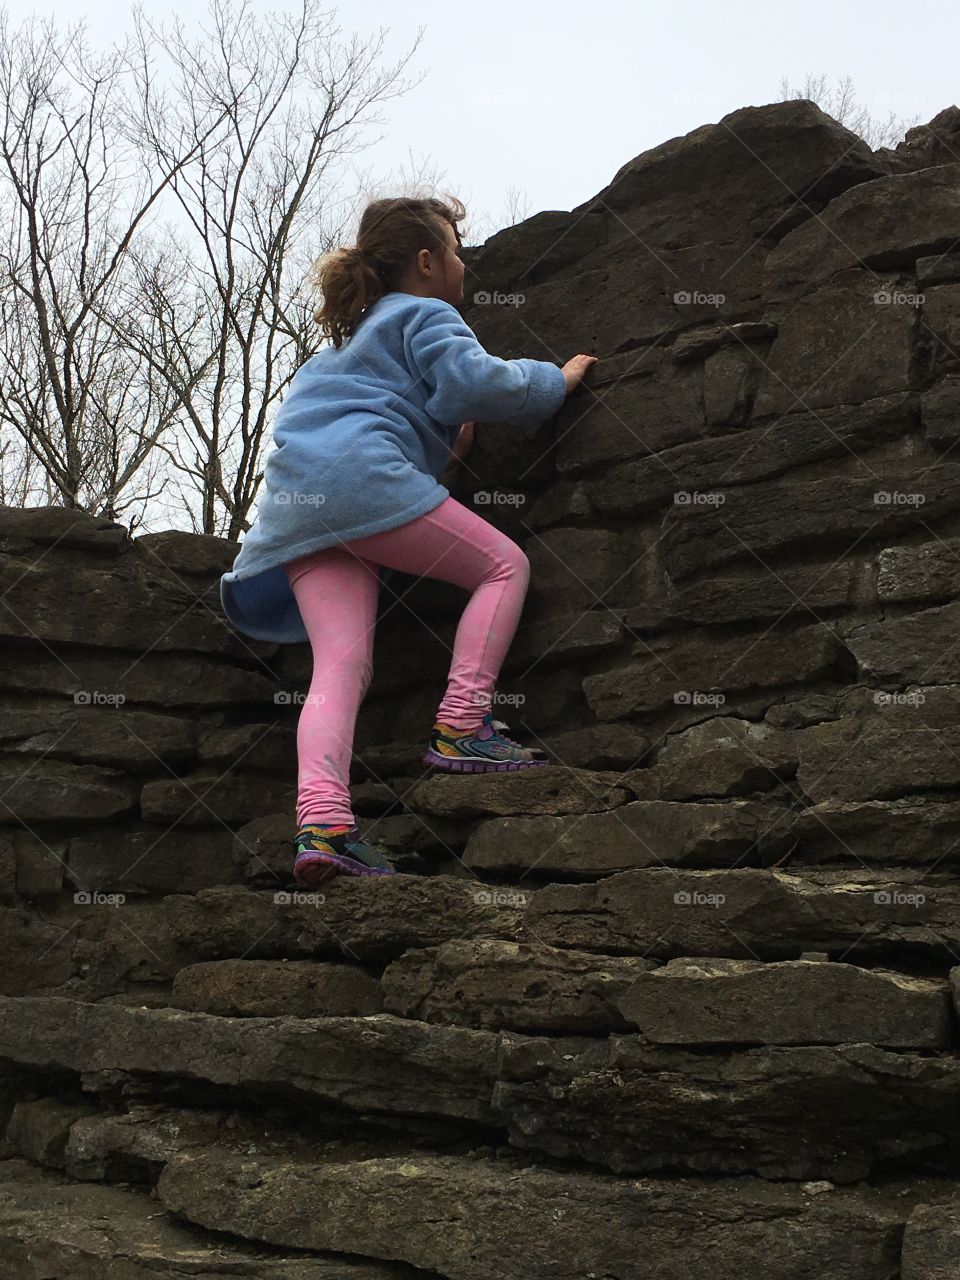 Girl climbing stone wall built at turn of the century